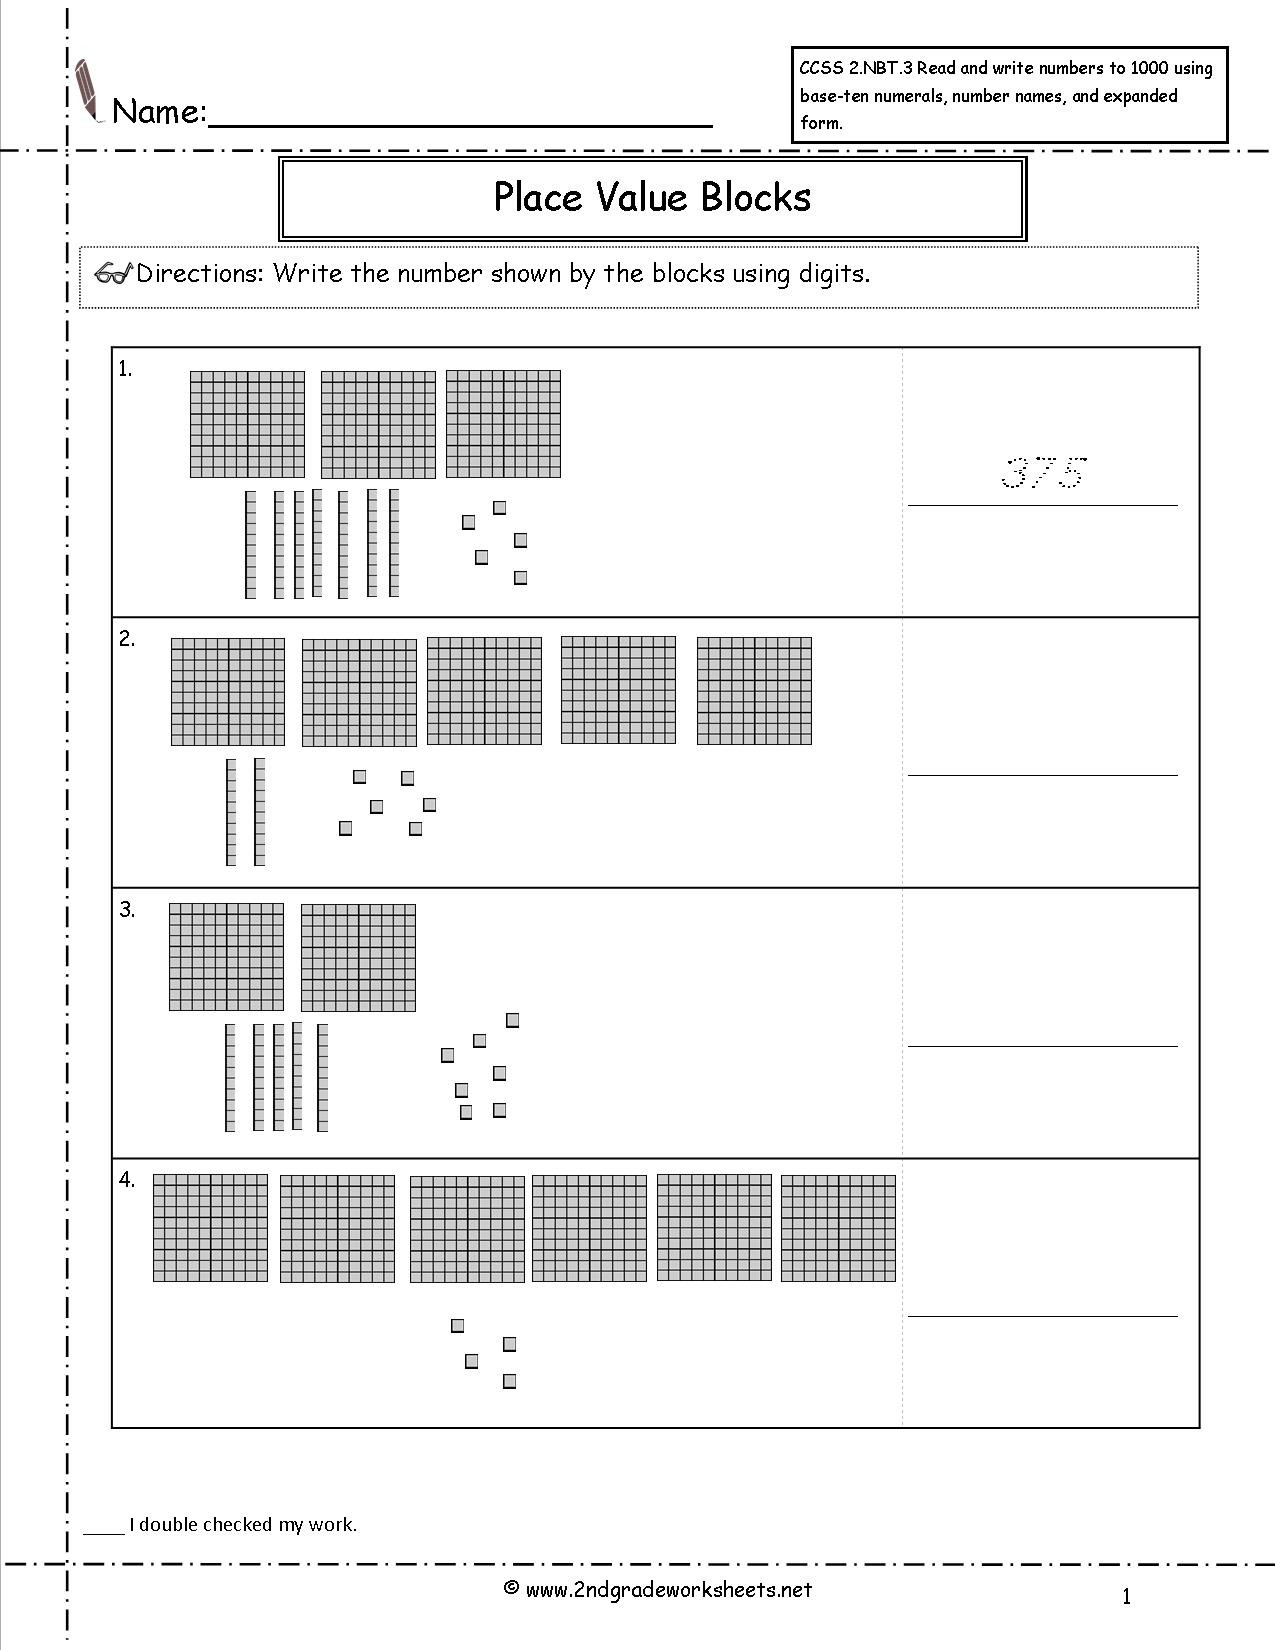 common-core-sheets-free-math-worksheets-spelling-words-5th-grades-education-math-common-core